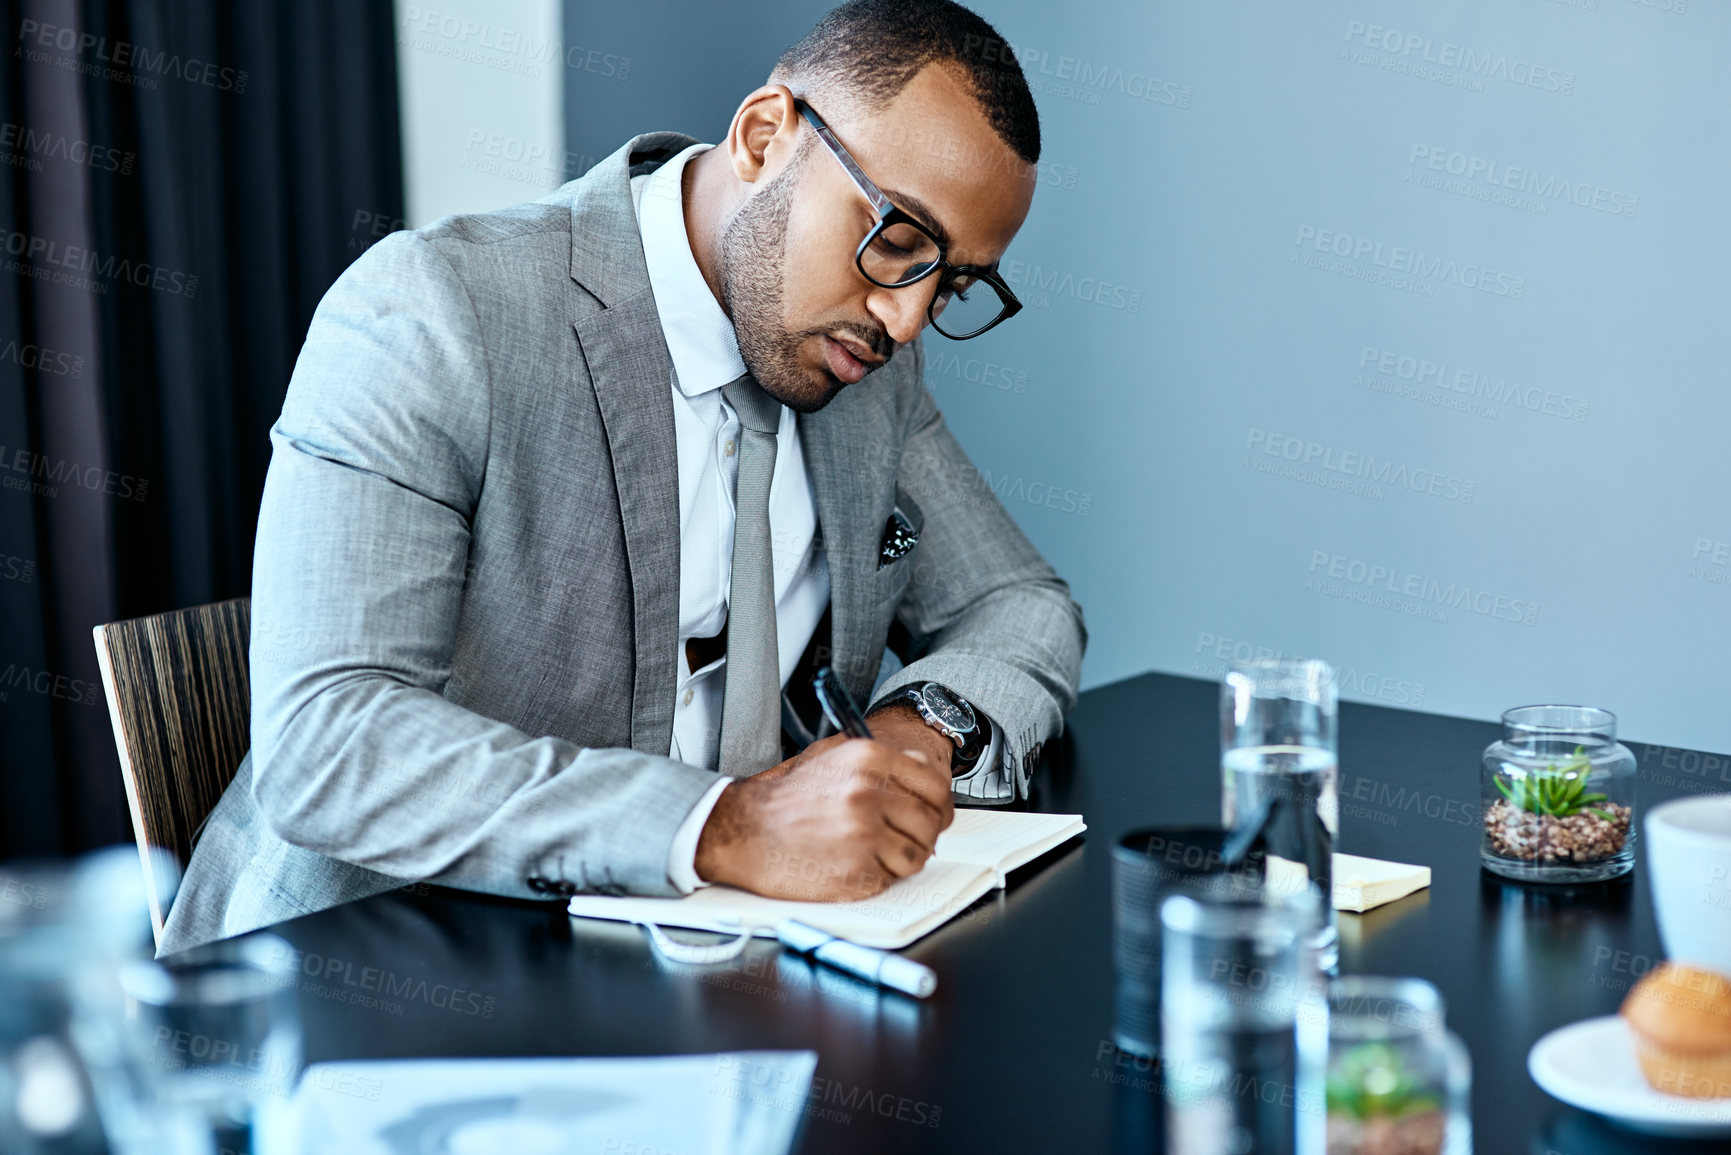 Buy stock photo Studio shot of a young businessman working against a grey background